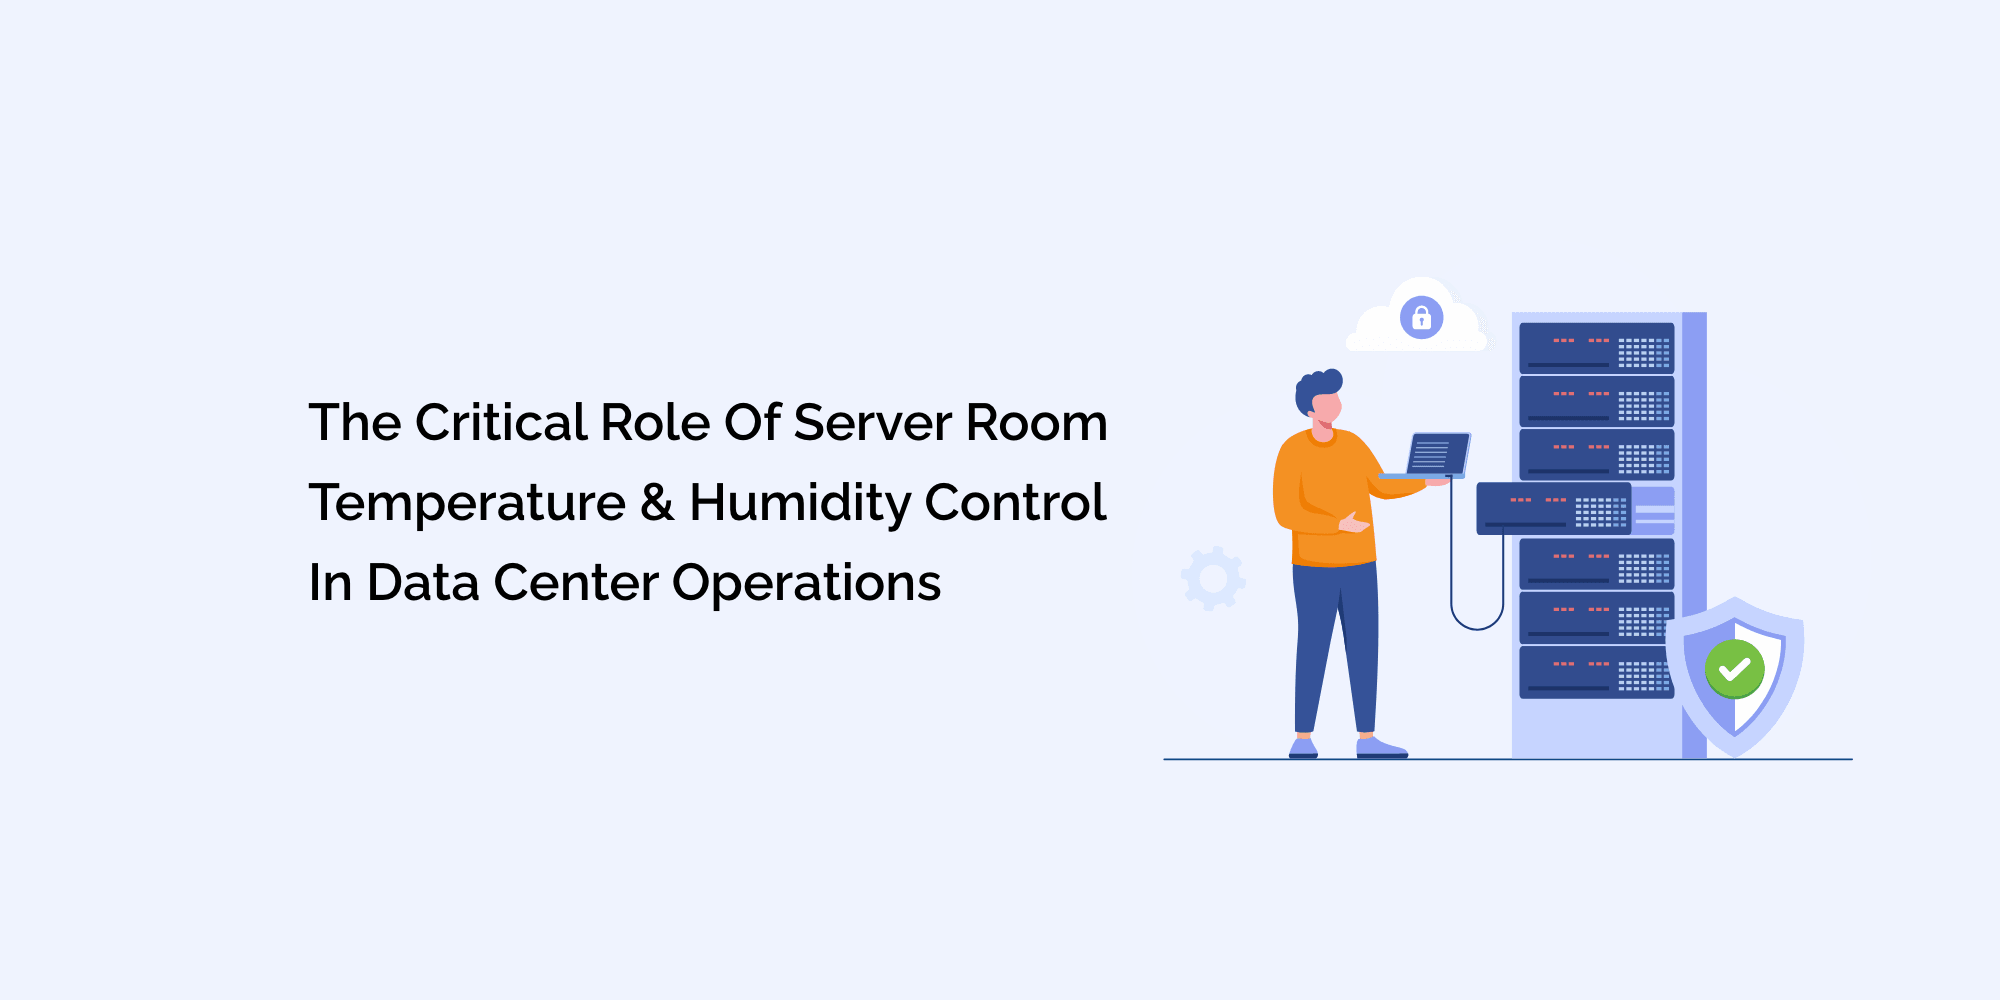 The Critical Role of Server Room Temperature & Humidity Control in Data Center Operations